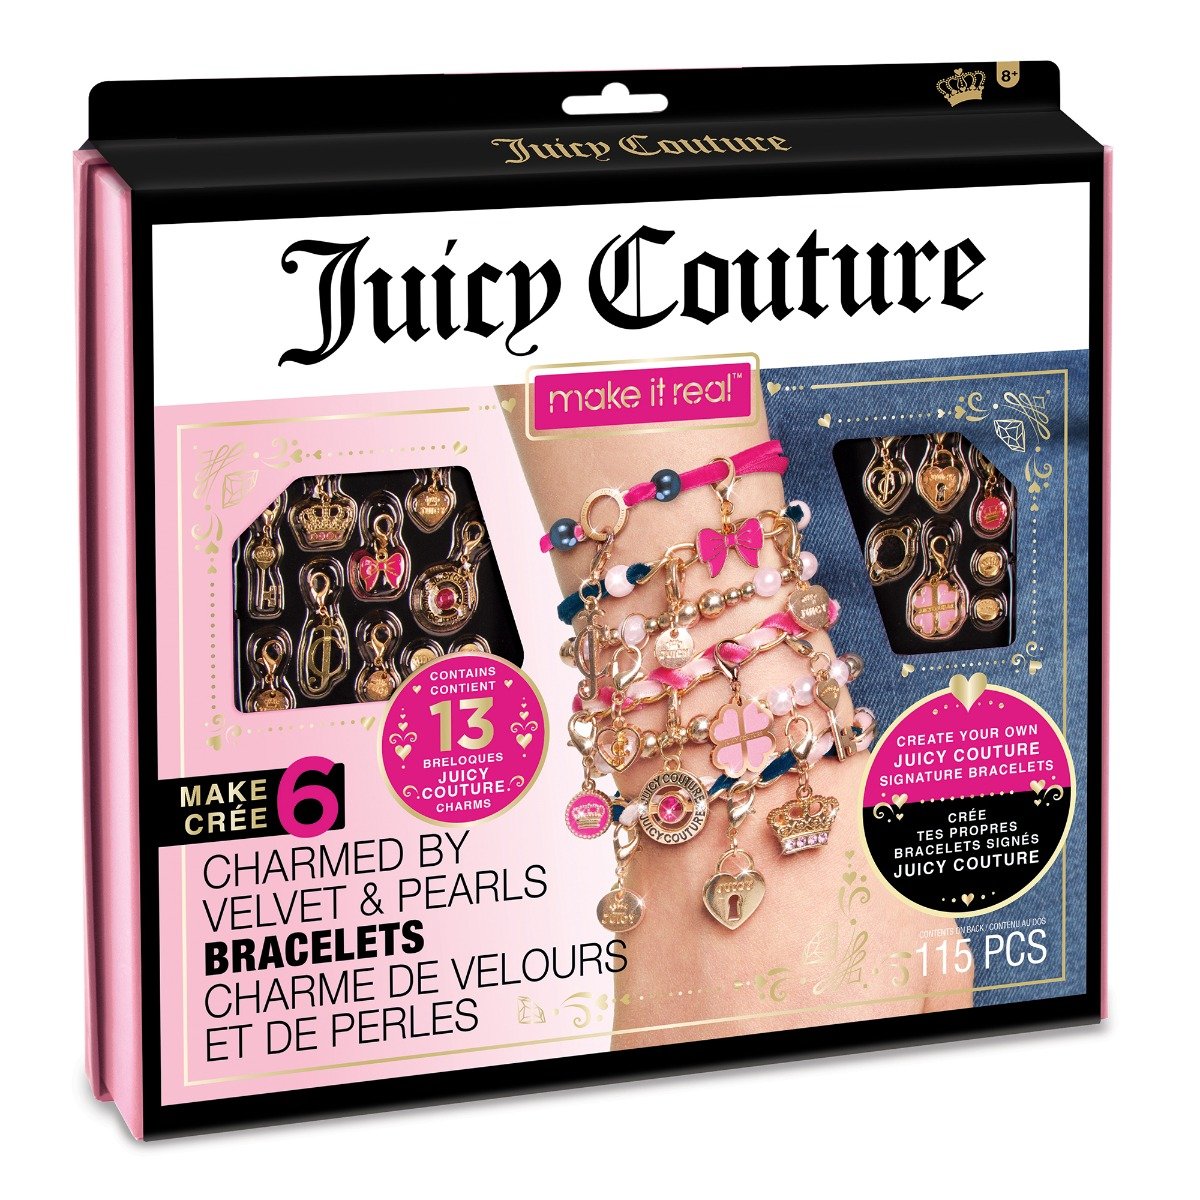 Set de bratari si bijuterii Juicy Couture Charmed By Velvet and Pearls, Make It Real and